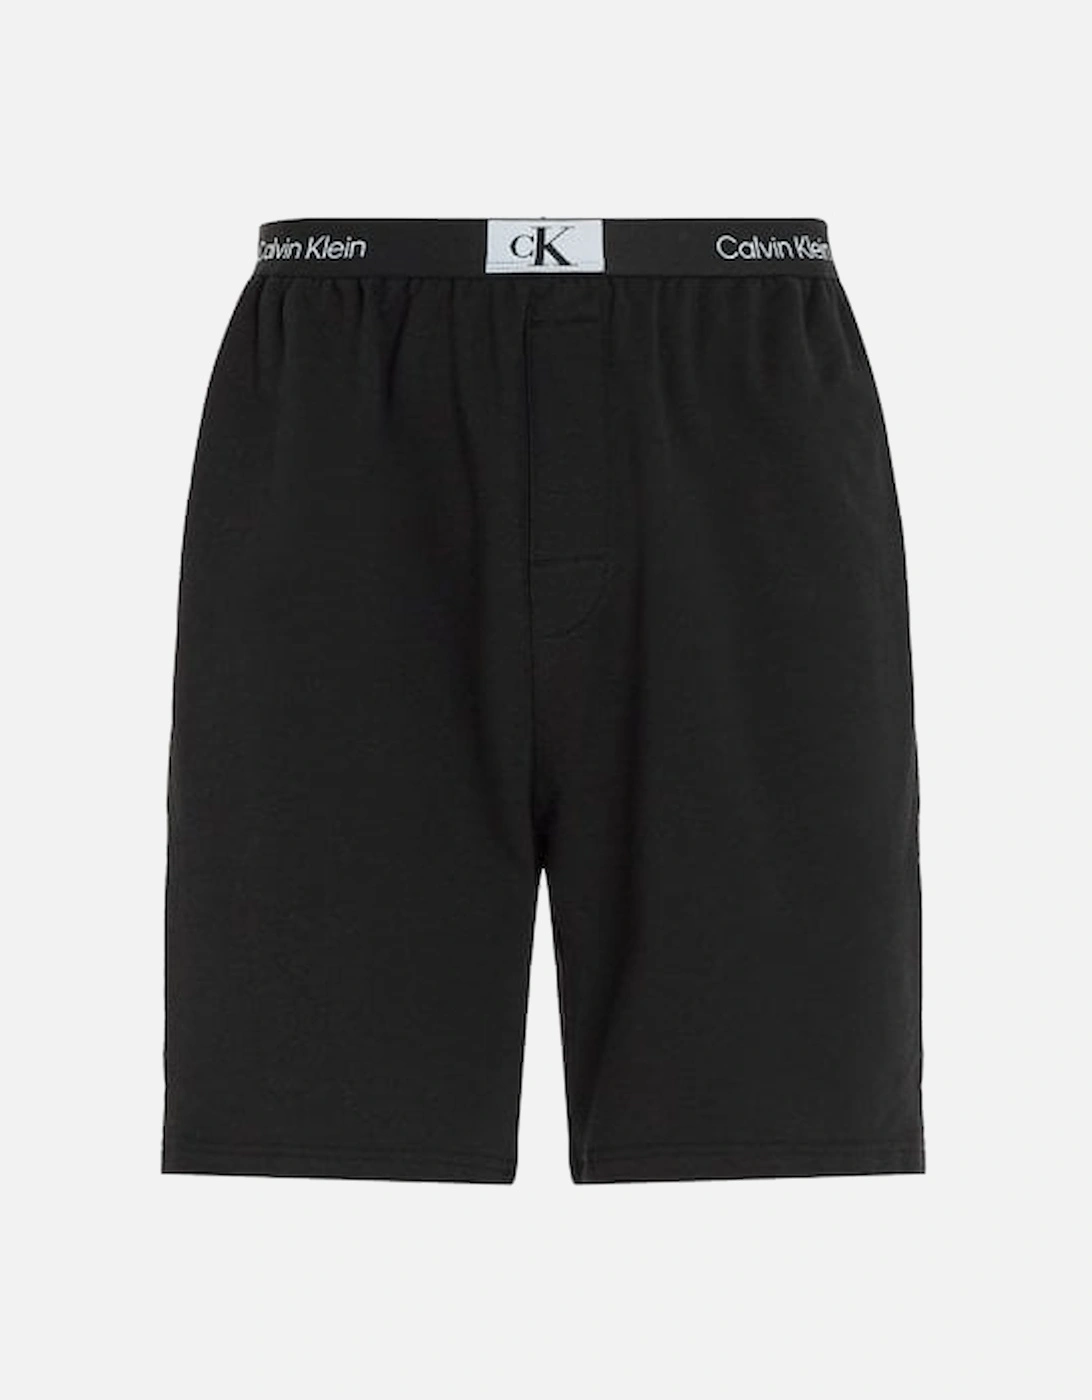 CK 96 French Terry Jogging Shorts, Black, 7 of 6